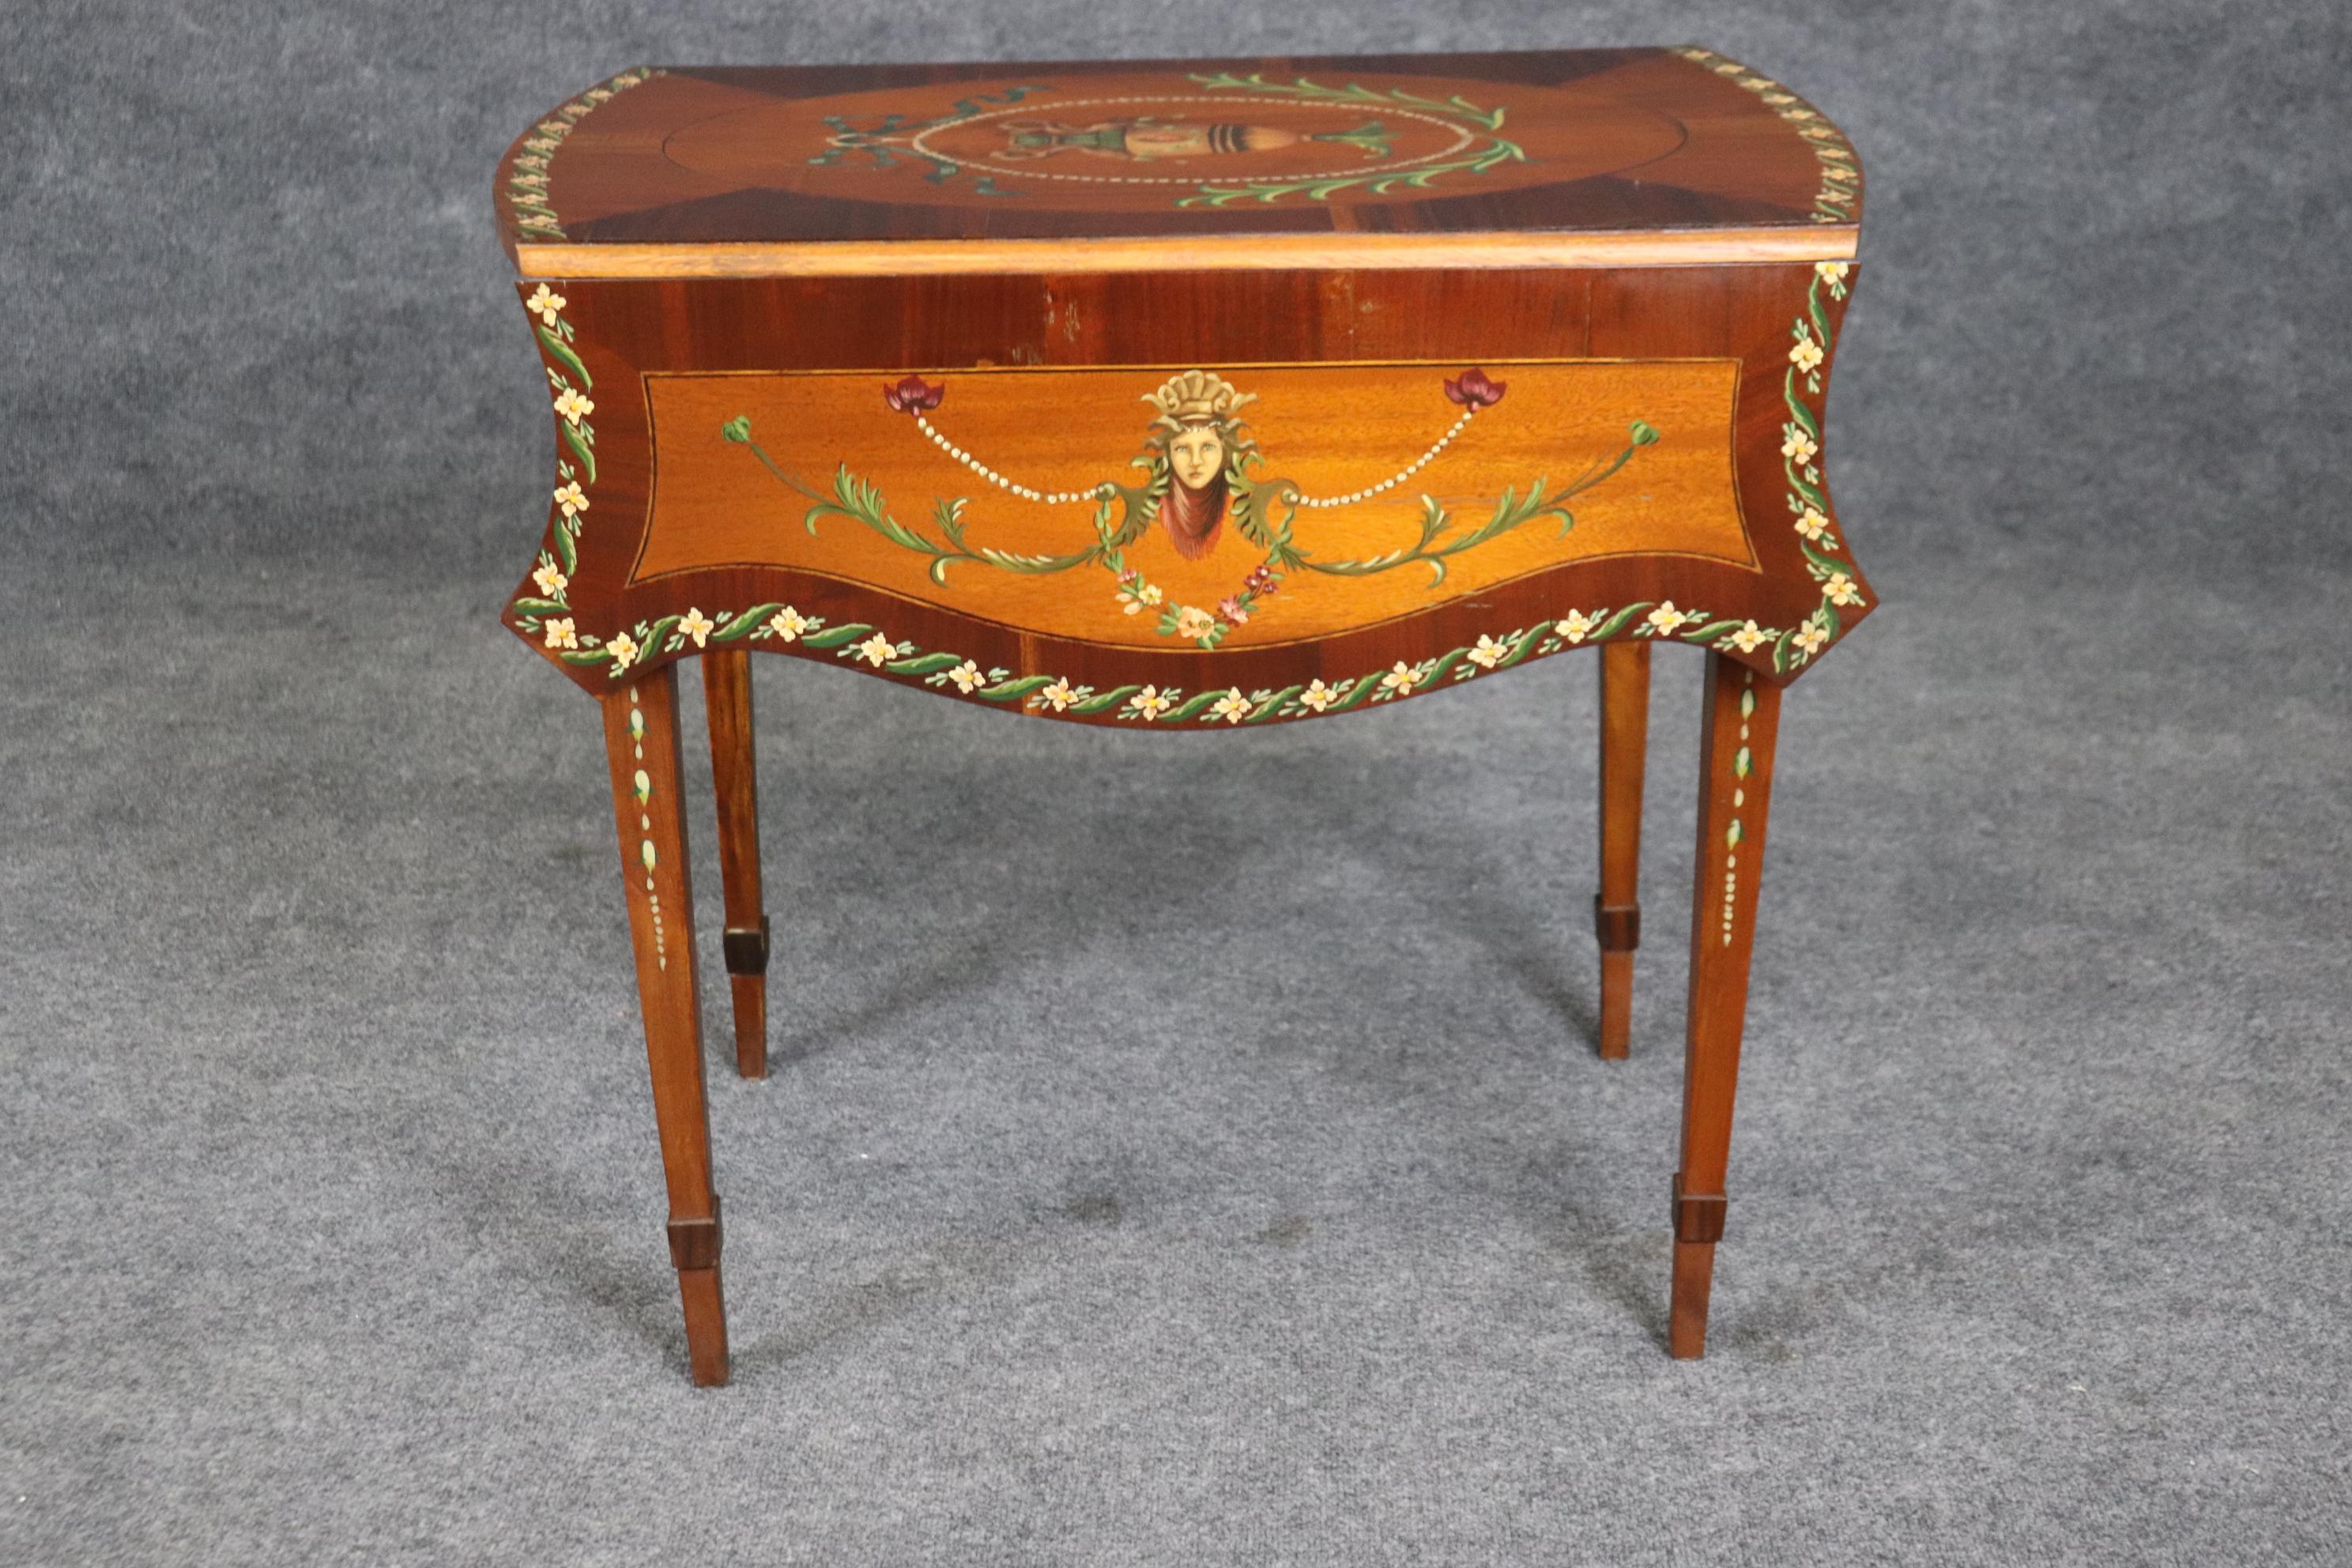 Rare Adams Paint Decorated English Pembroke Table Circa 1920 For Sale 2